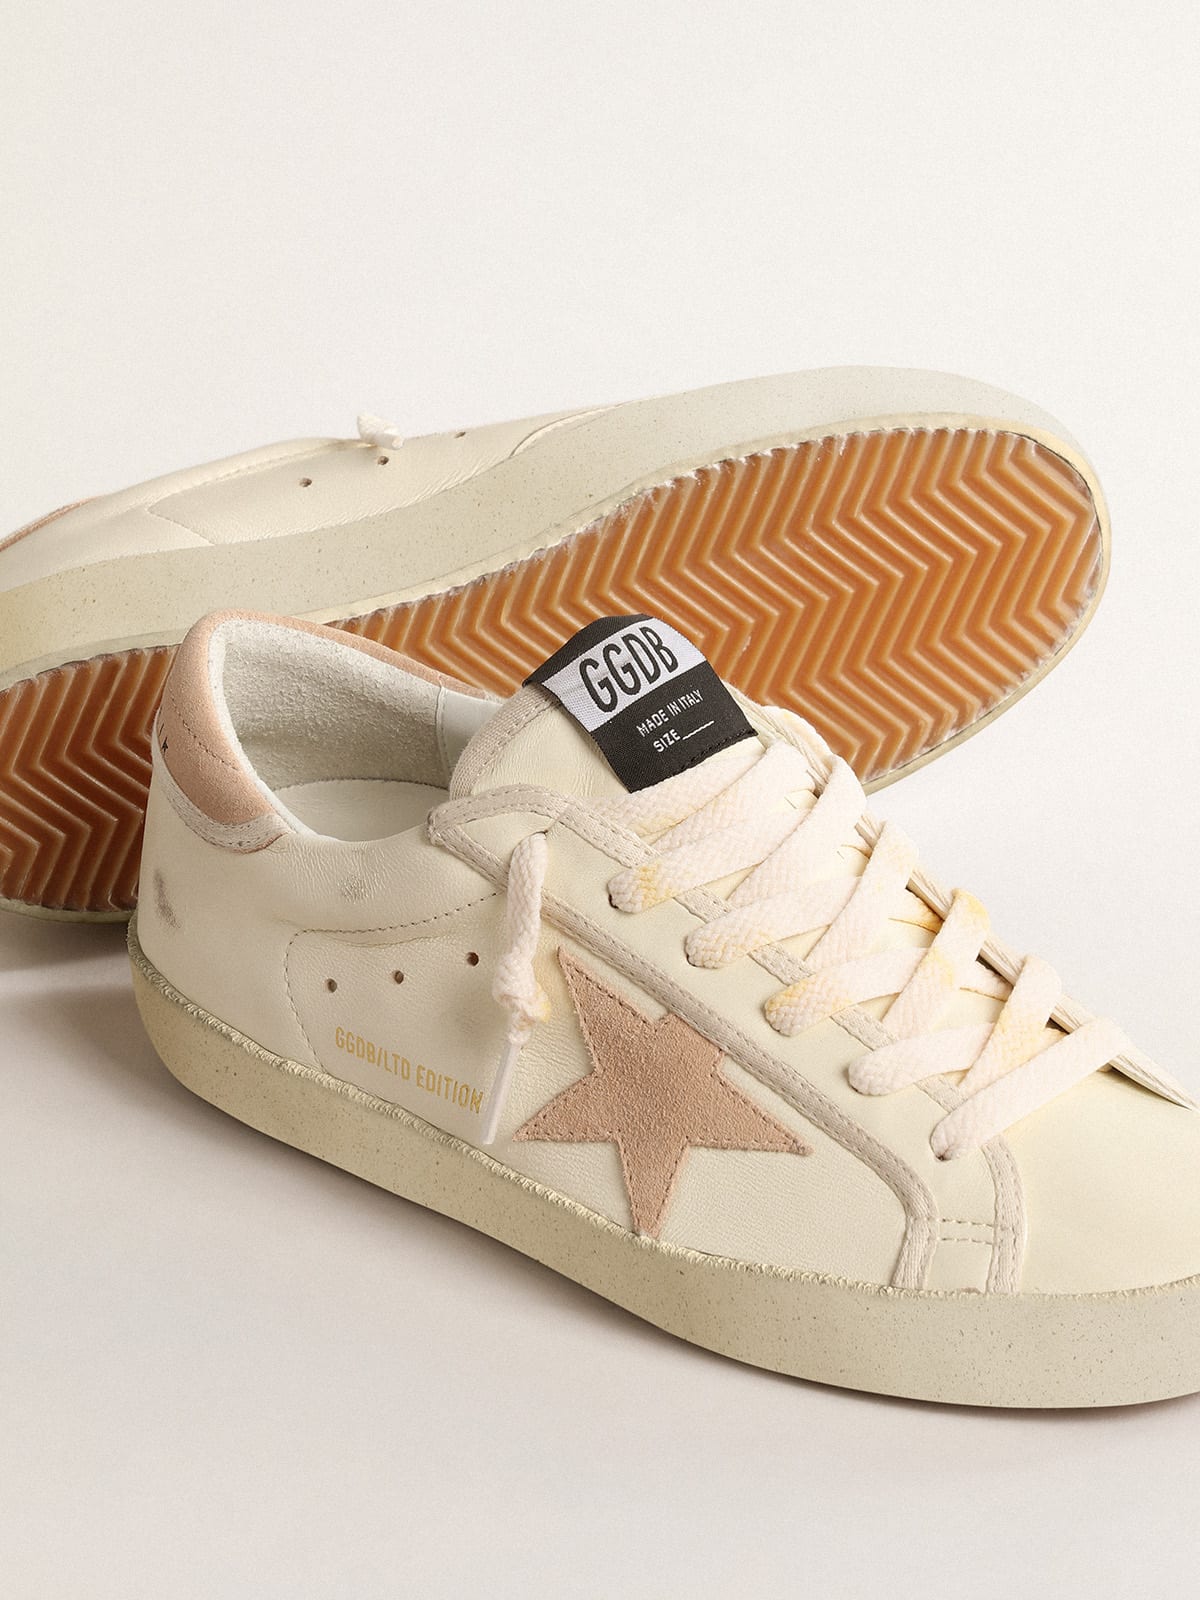 Golden Goose - Women’s Super-Star LTD in nappa with suede star and heel tab in 